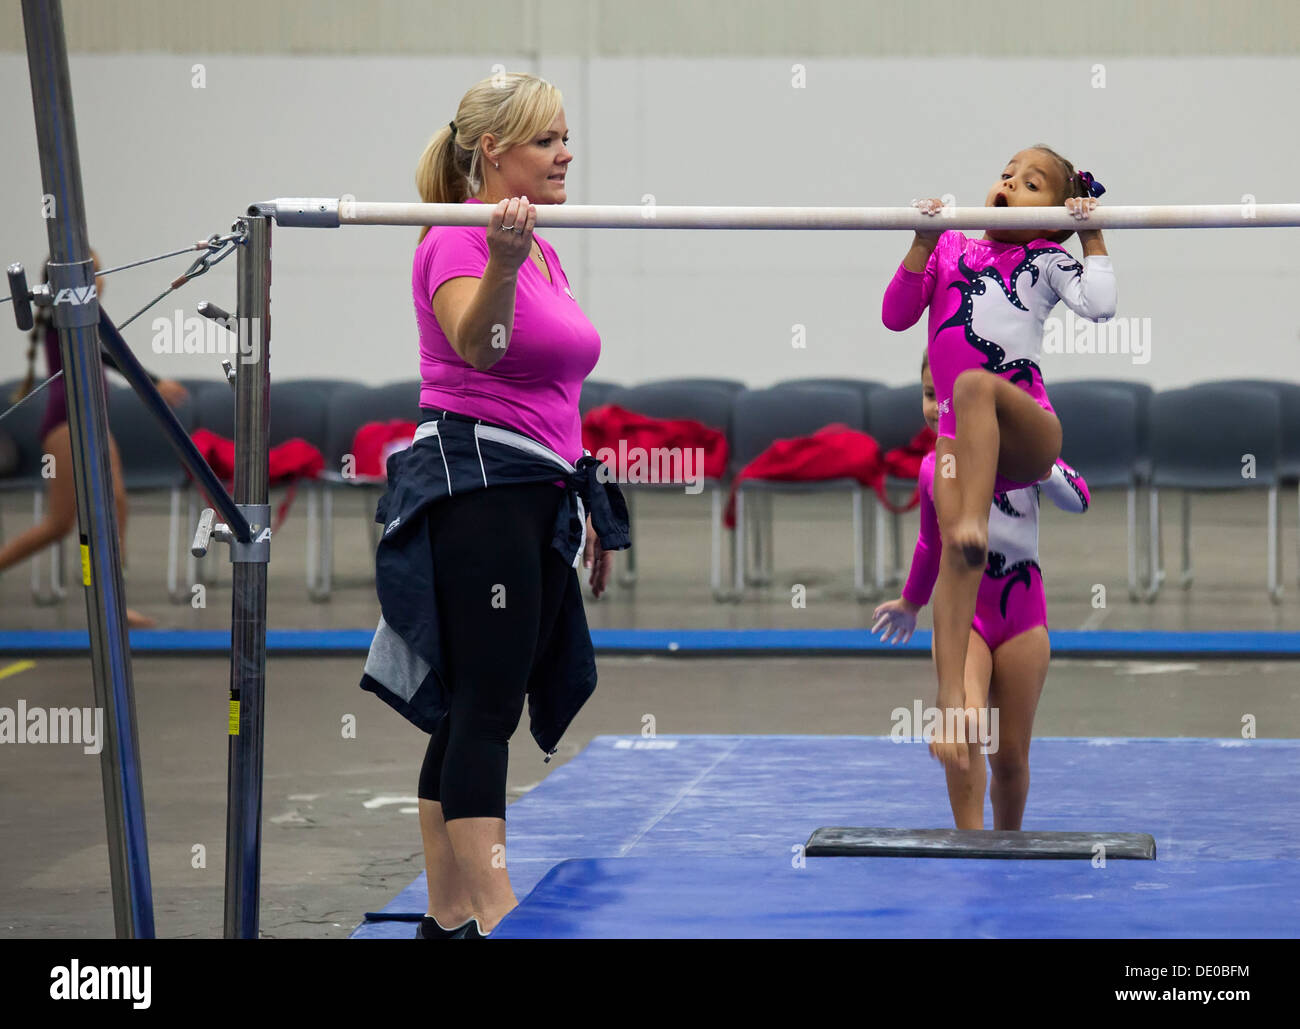 Detroit, Michigan - A coach watches as girls warm up on the parallel bars before competition in the AAU Junior Olympic Games. Stock Photo